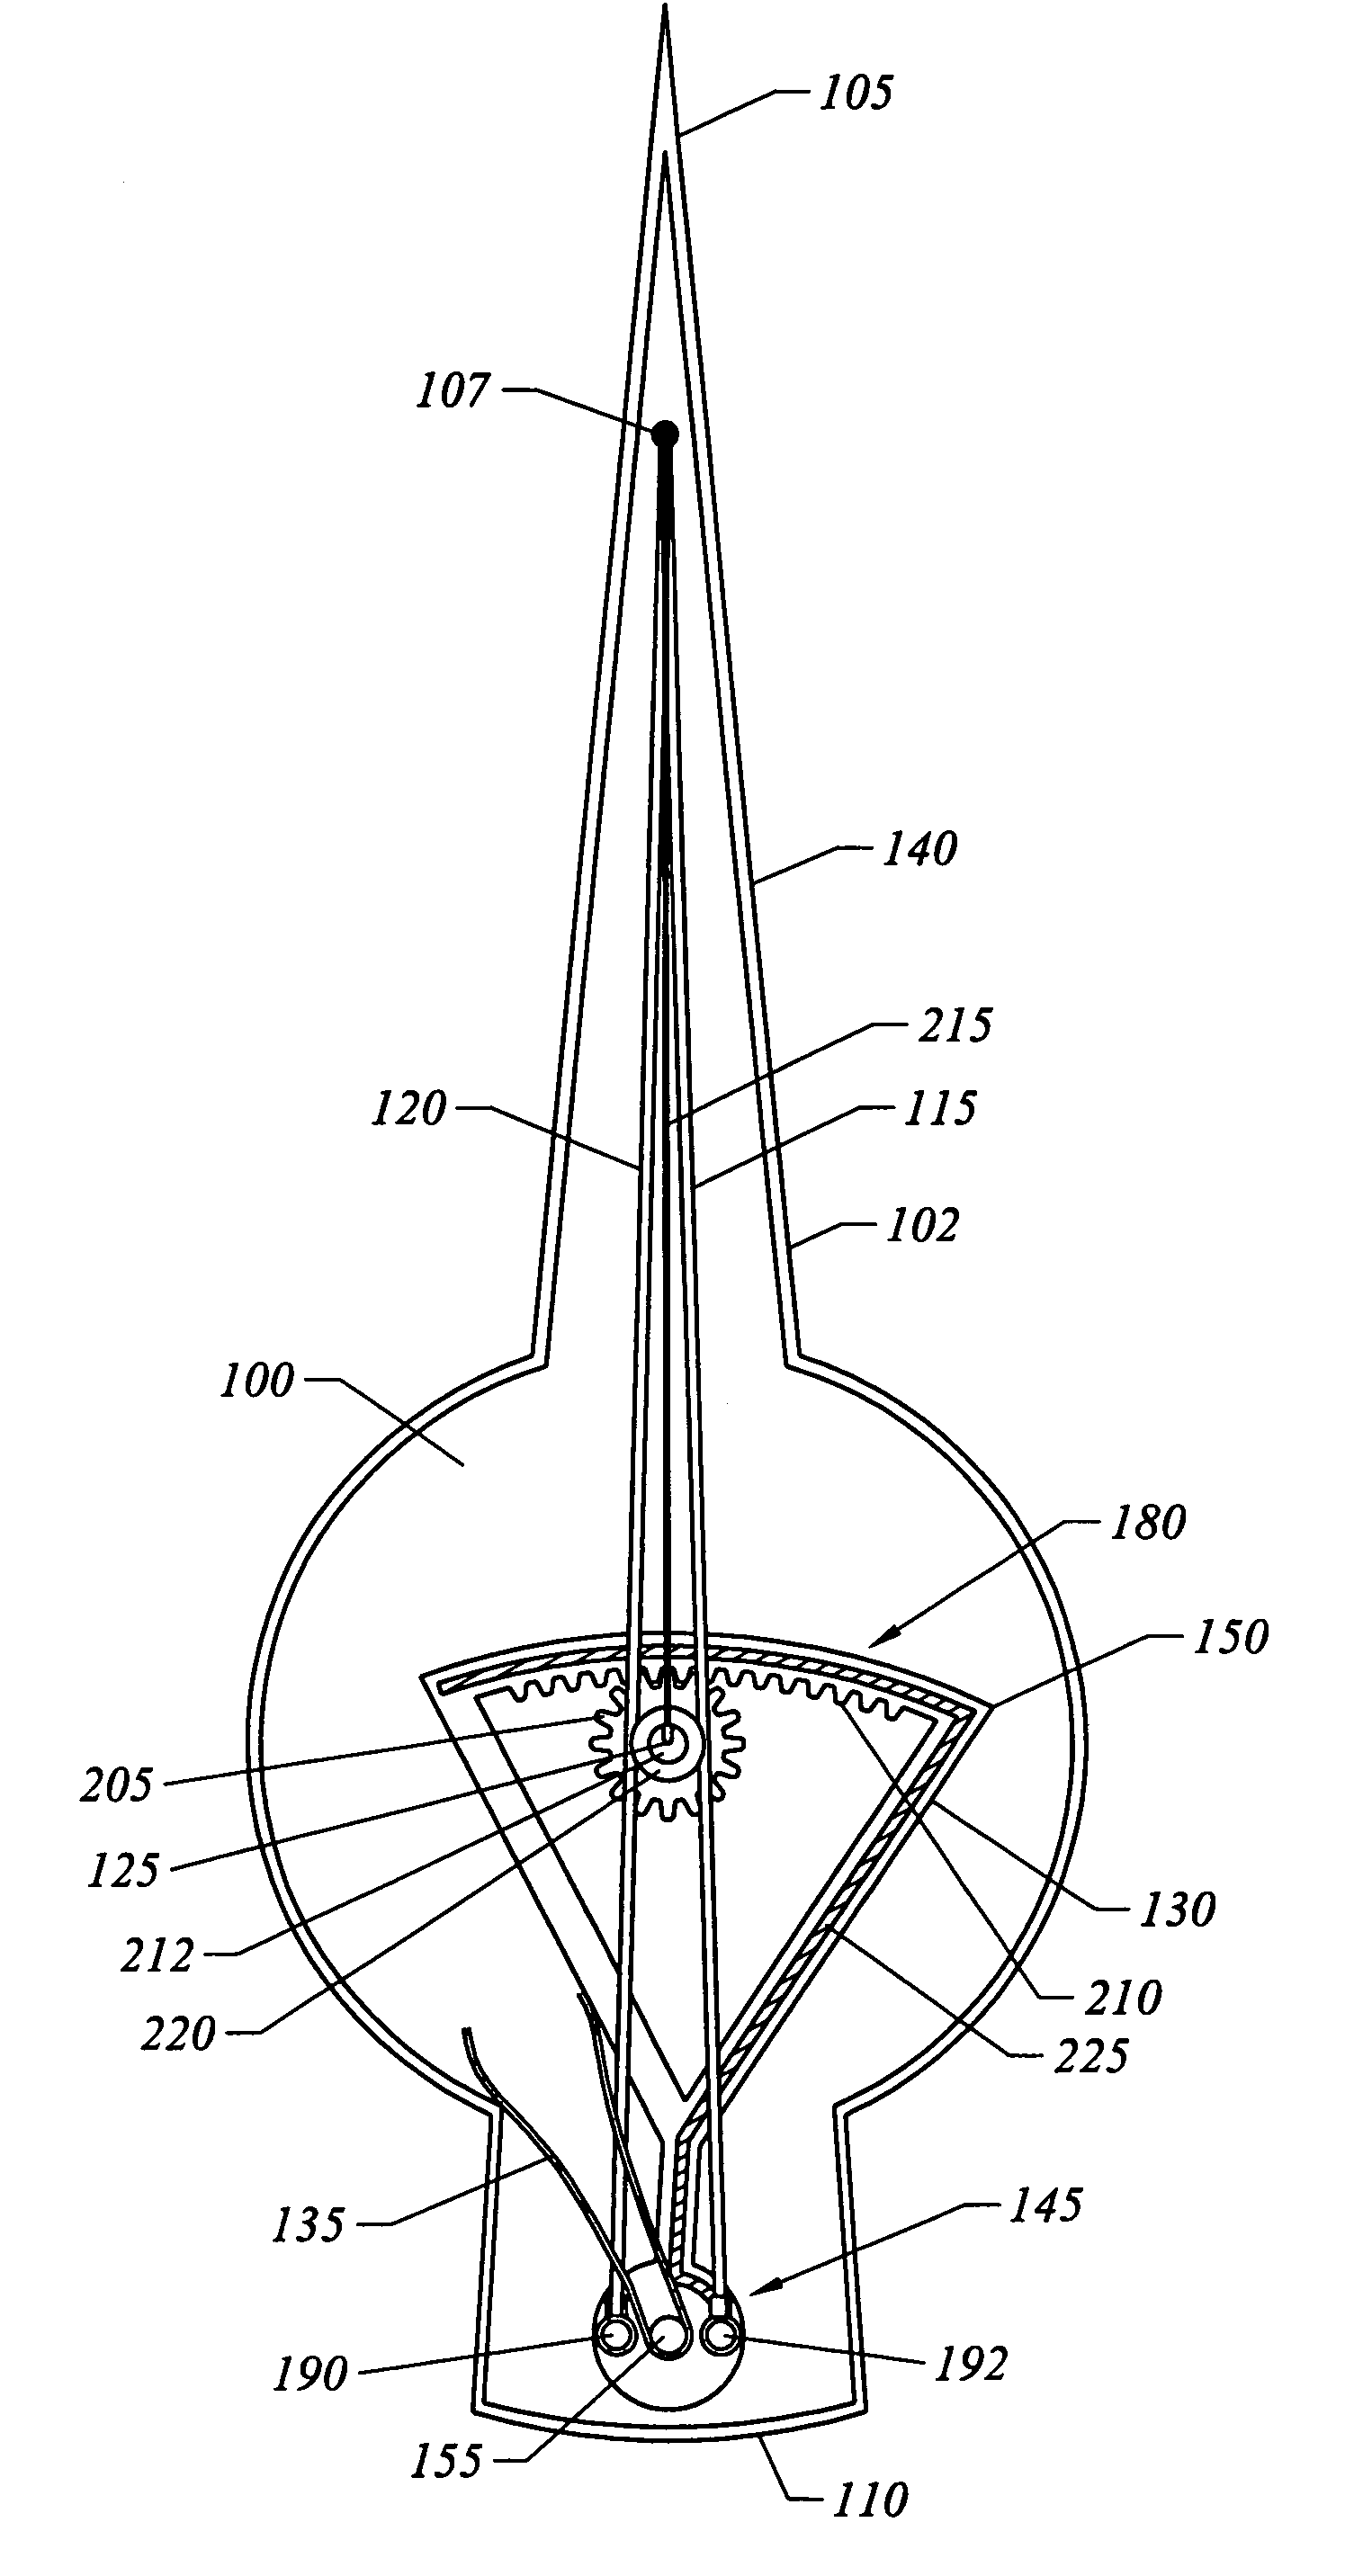 Gauge pointer with integrated shape memory alloy actuator